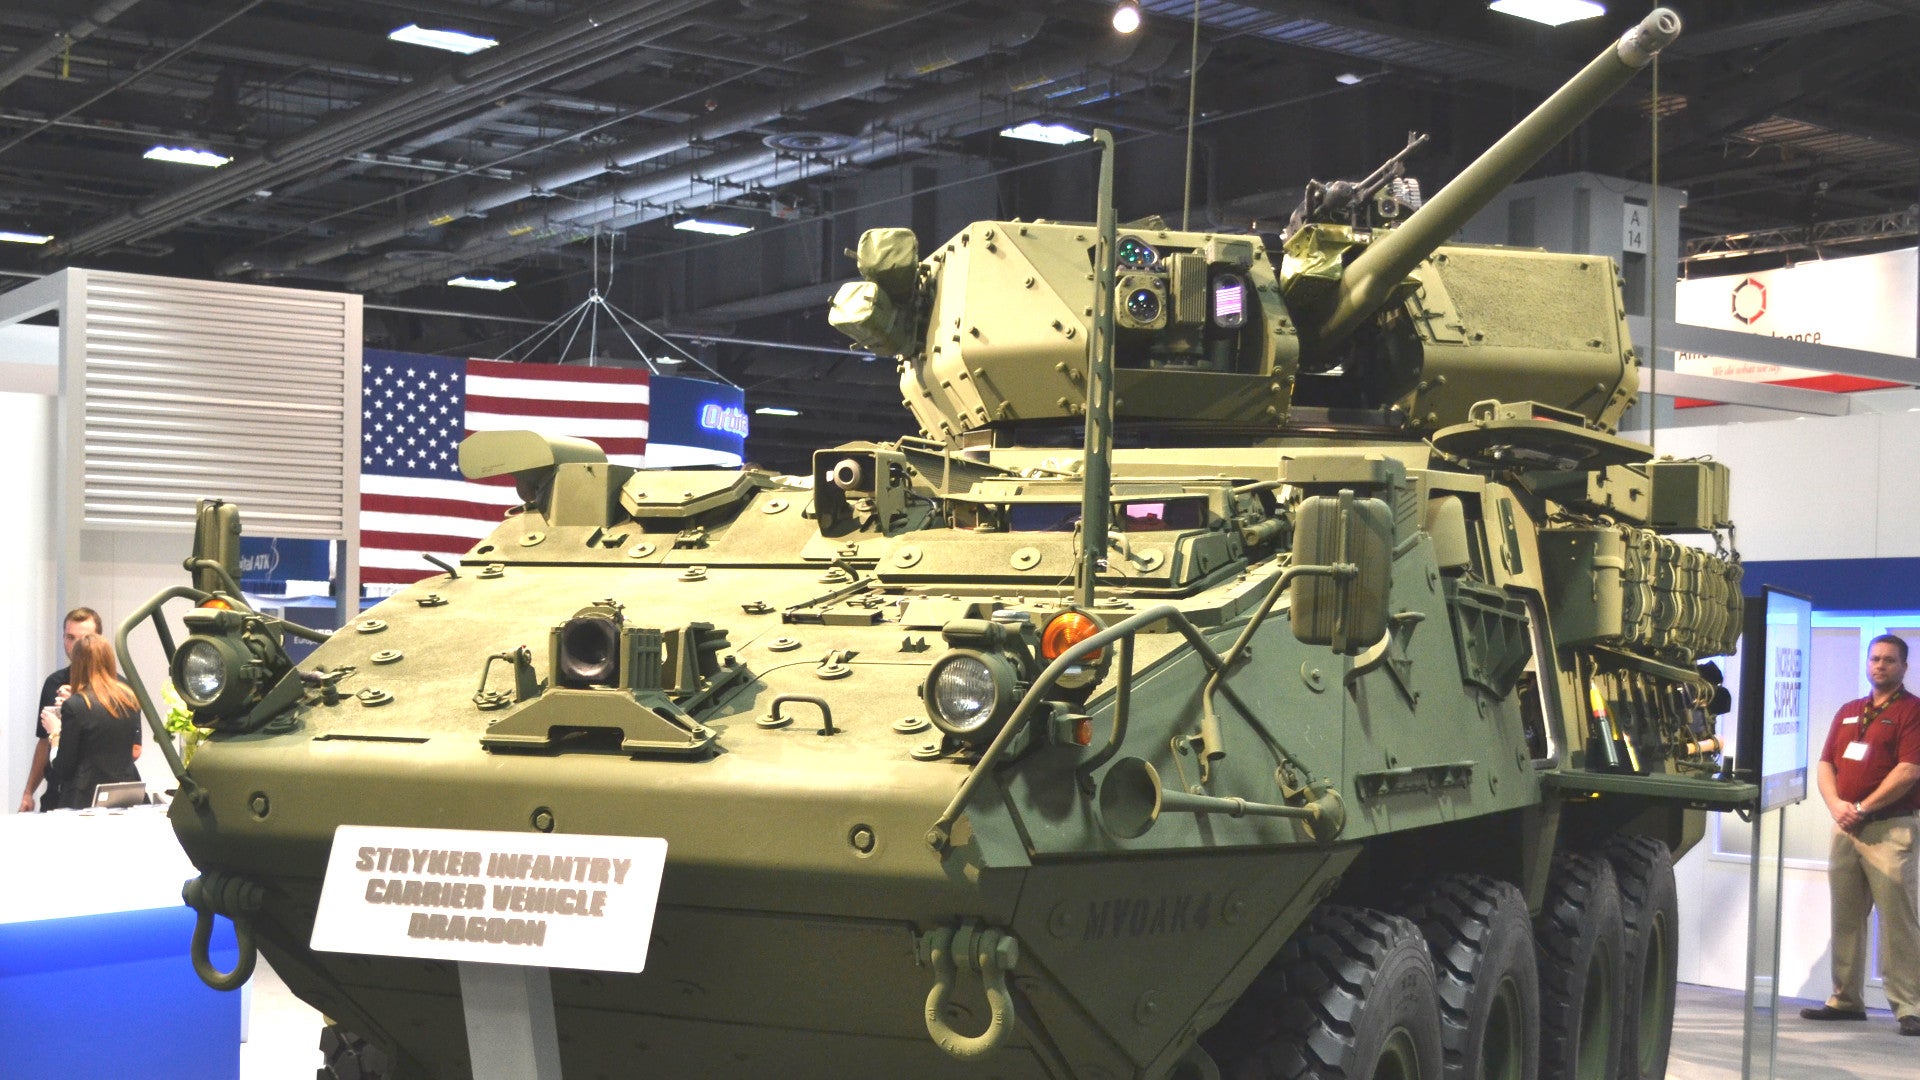 Highlights From the Showroom Floor at the Army’s Biggest Arms Expo and Conference